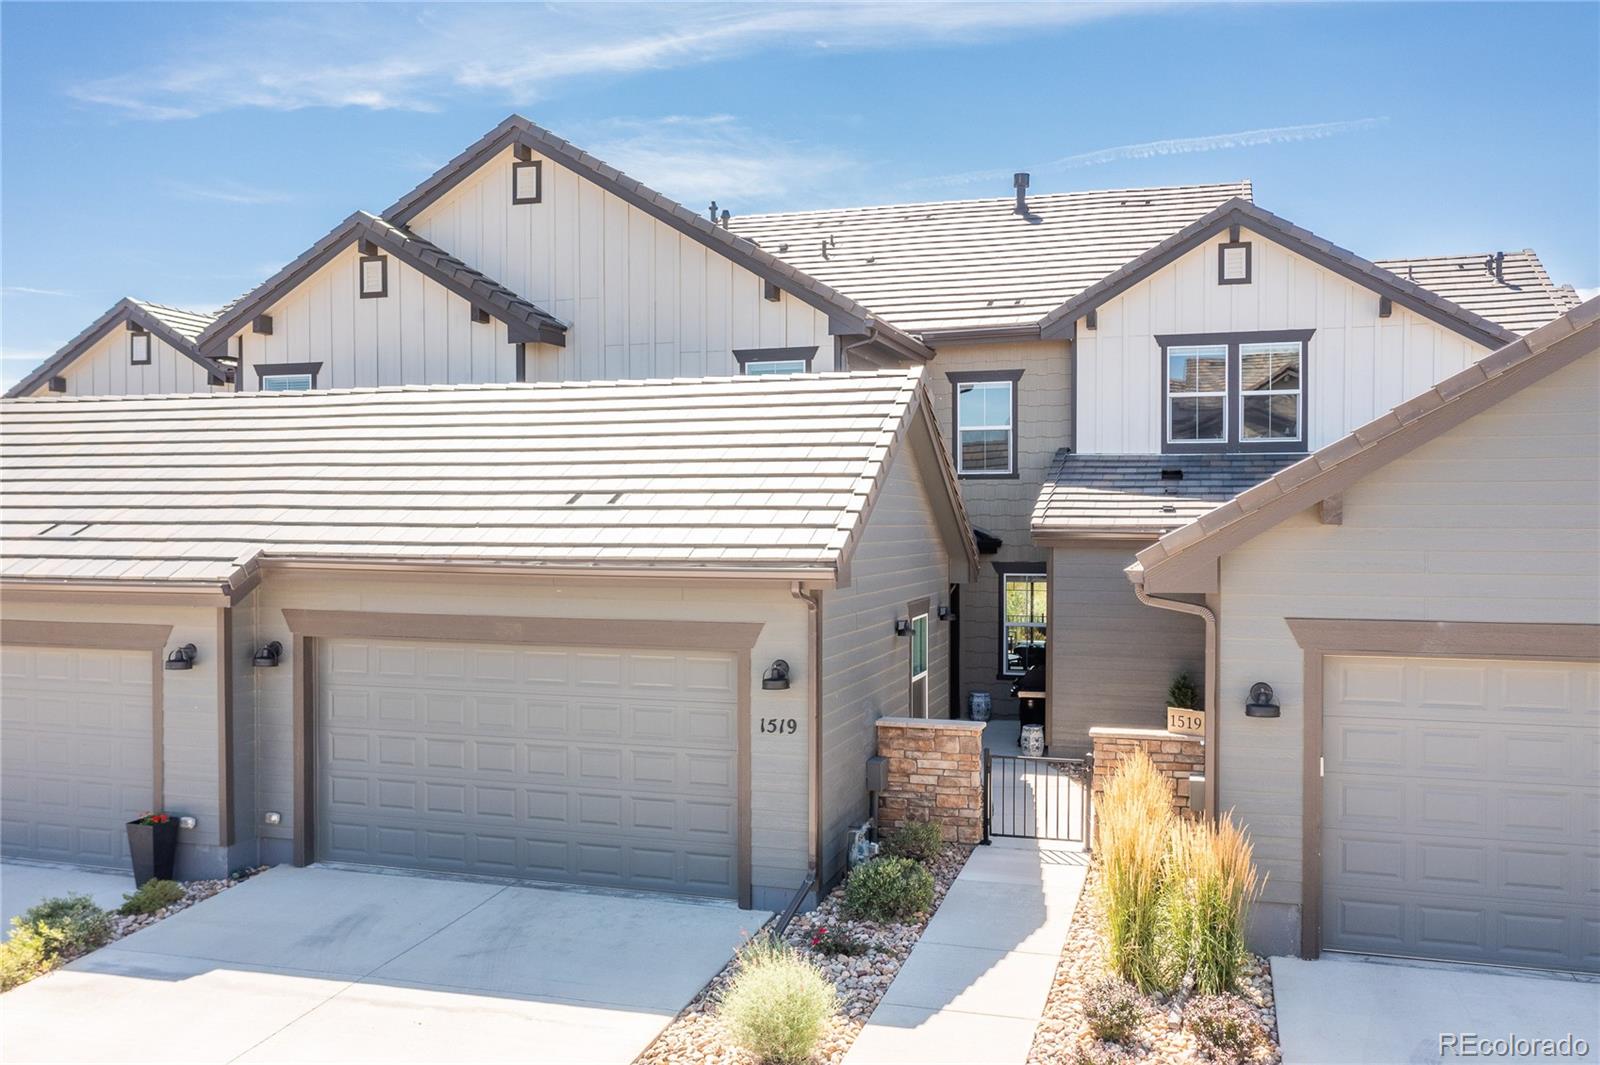 View Berthoud, CO 80513 townhome